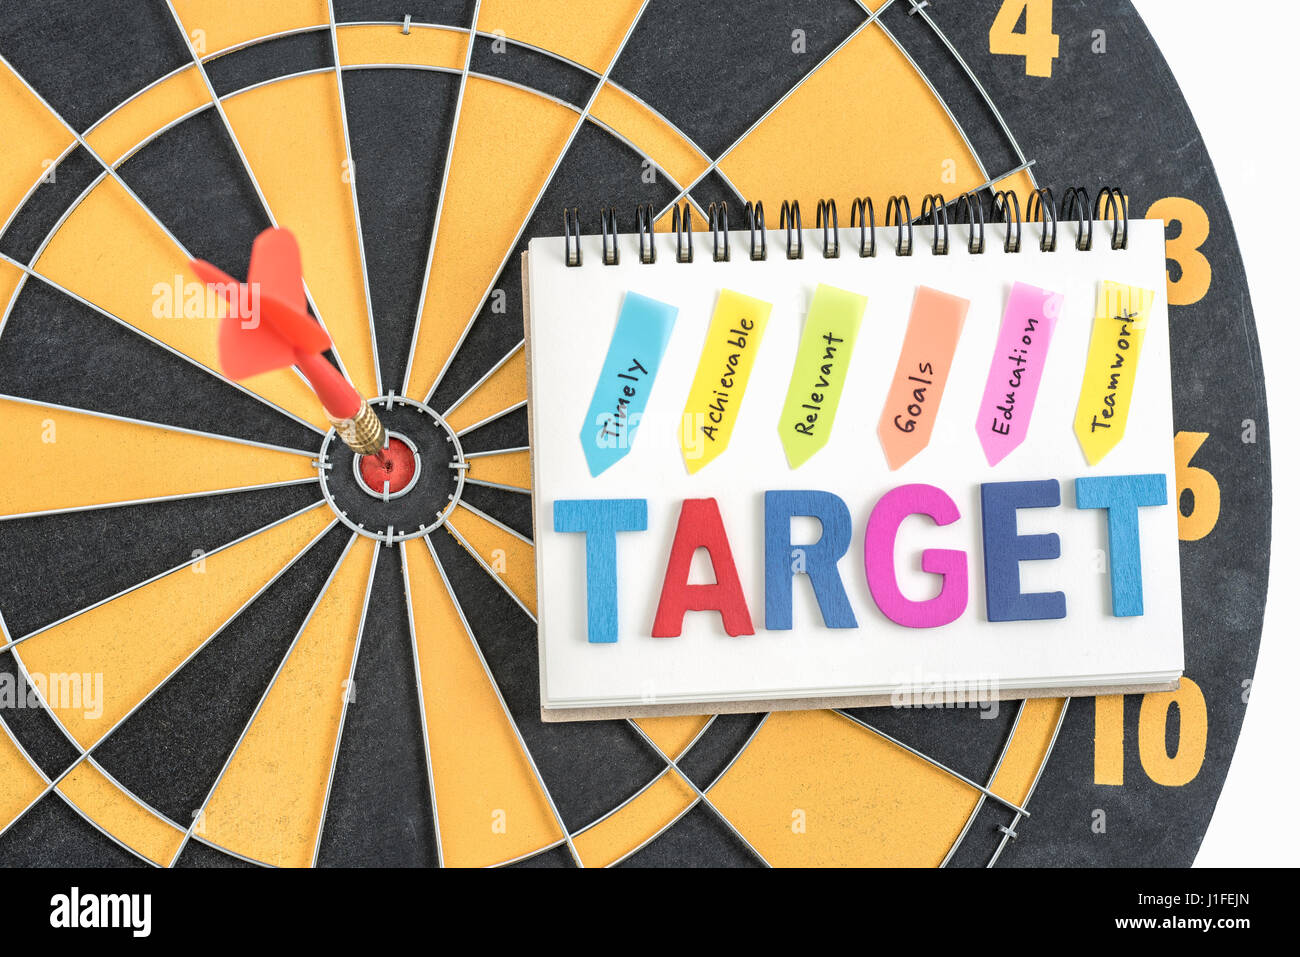 dart target in bullseye with words target on the notebook with handwriting timely achievable relevant goals education teamwork over dartboard backgrou Stock Photo